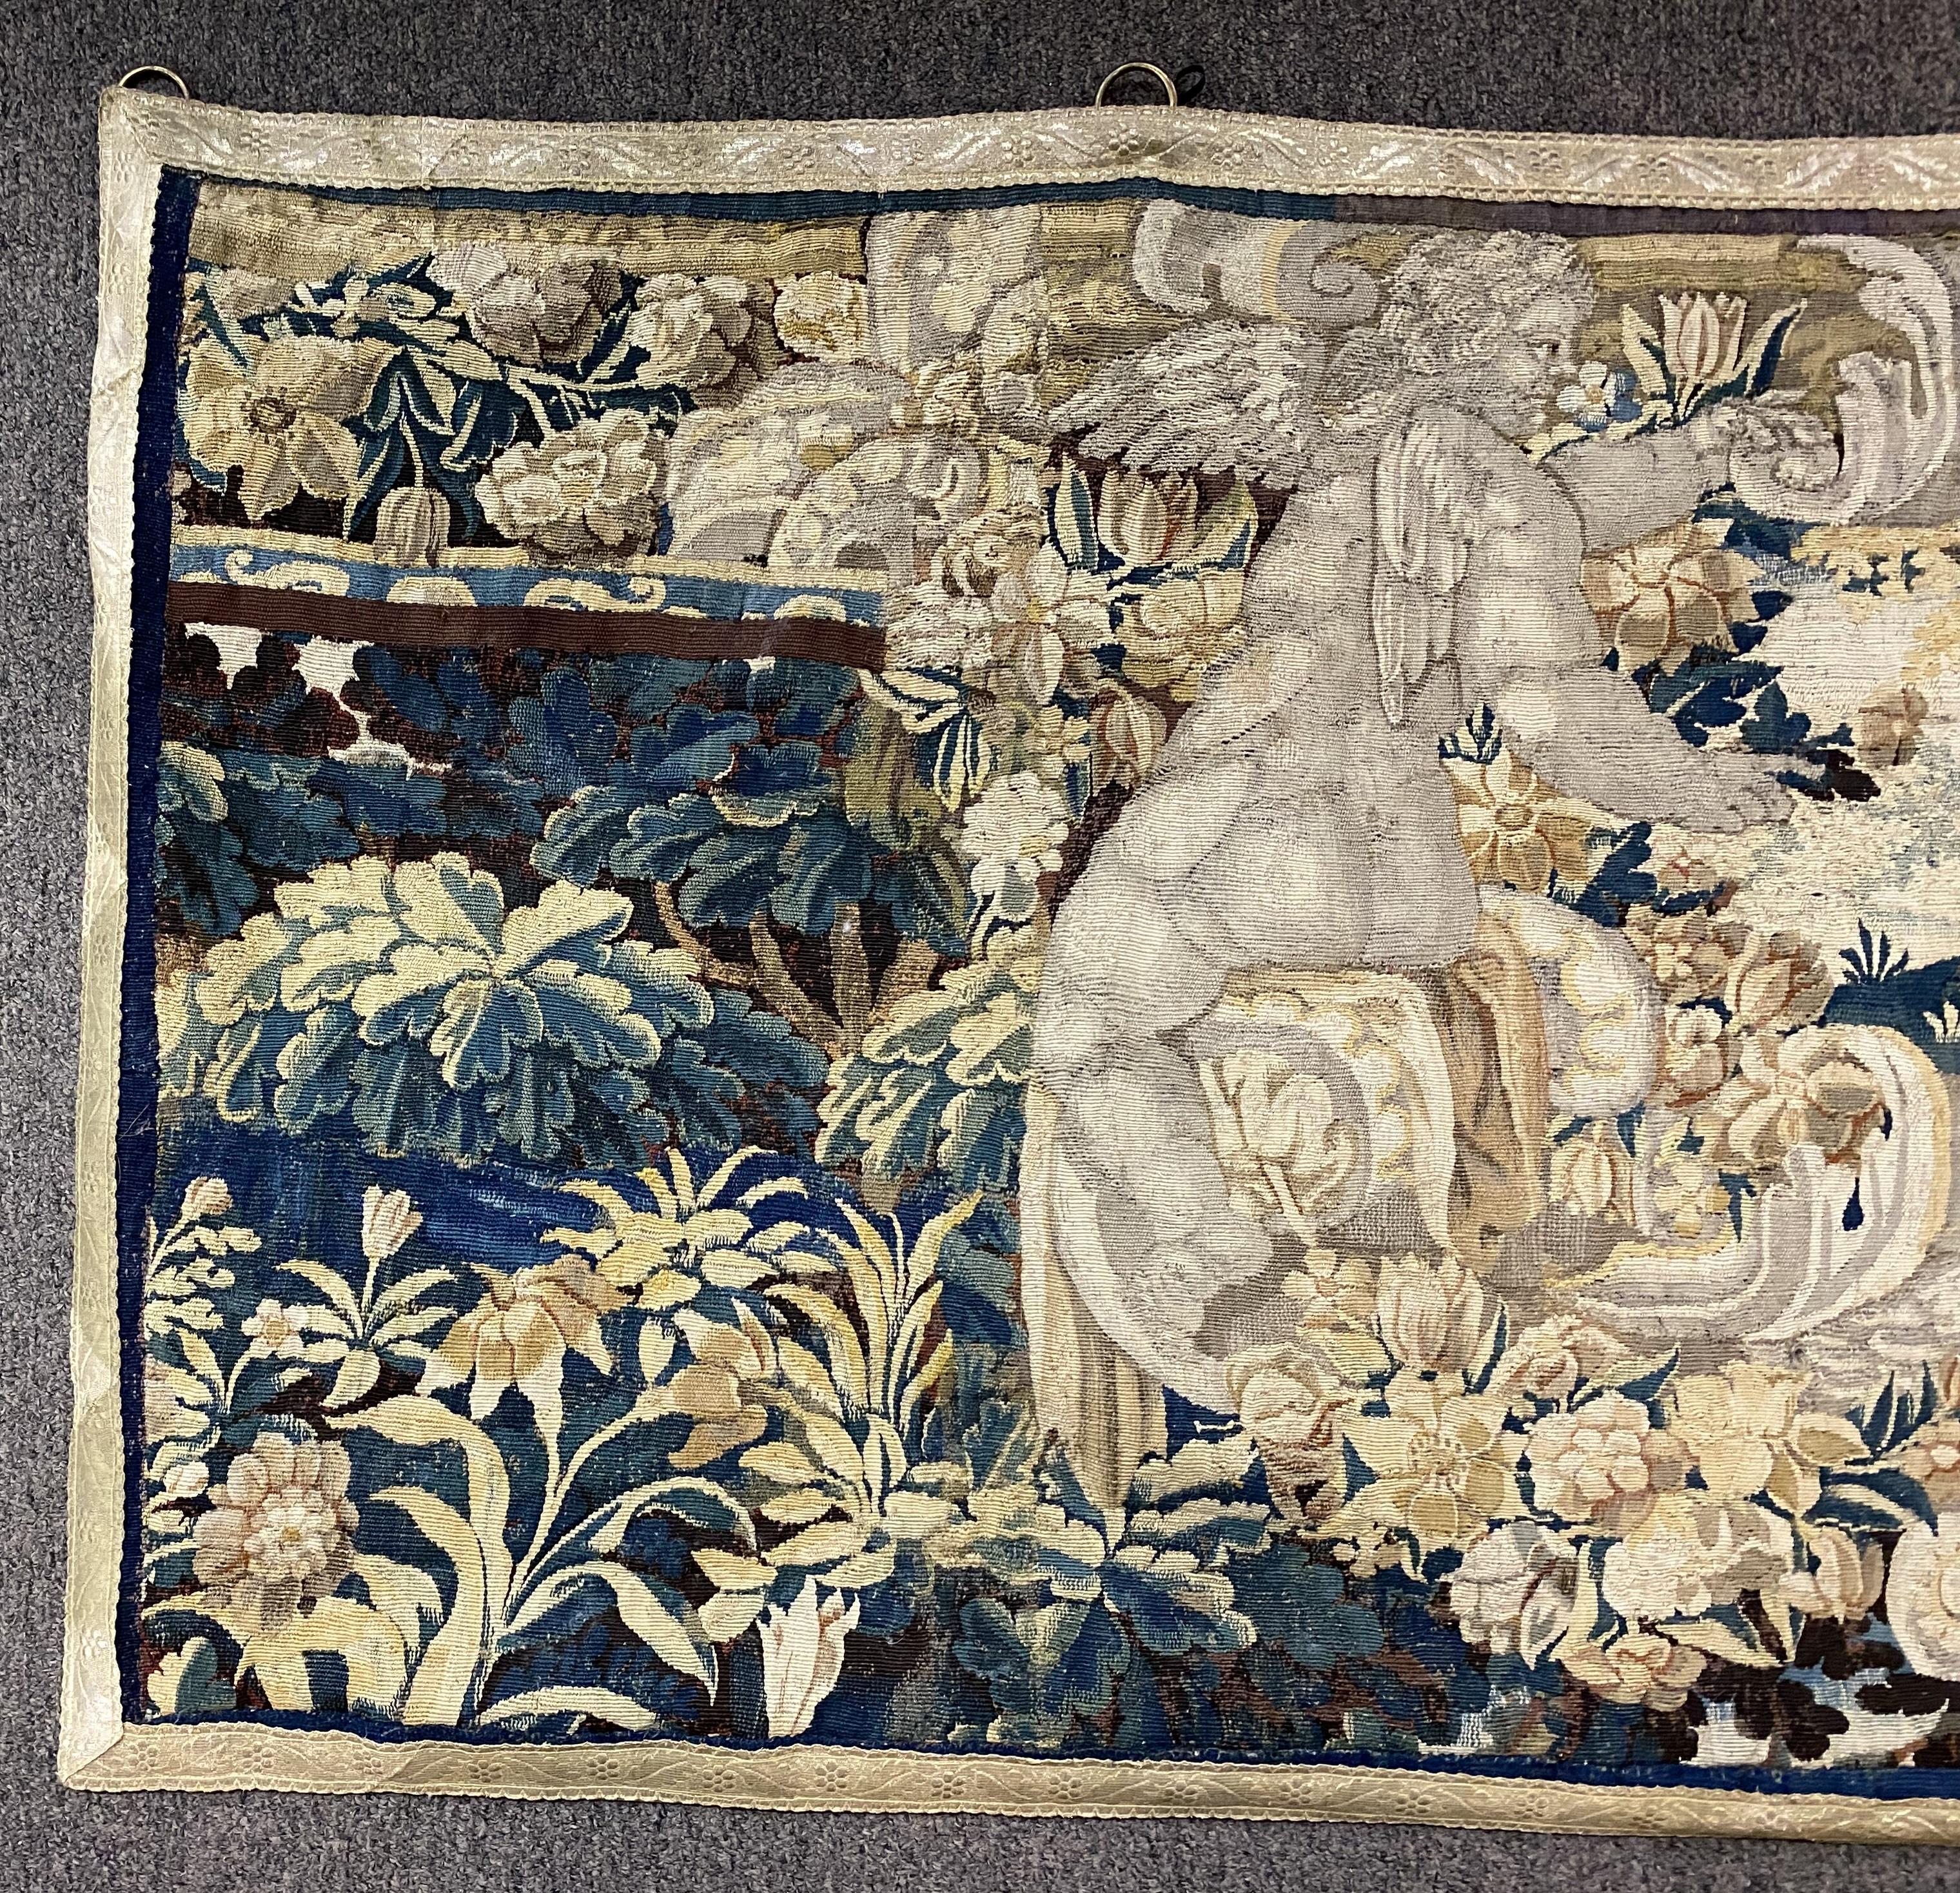 A nice example of a Continental hand wrought tapestry decorated with putti or angels and cartouche, with foliate accents and subtle tan border with raised flowers. The tapestry has a plain fabric backing, and brass rings have been added along the